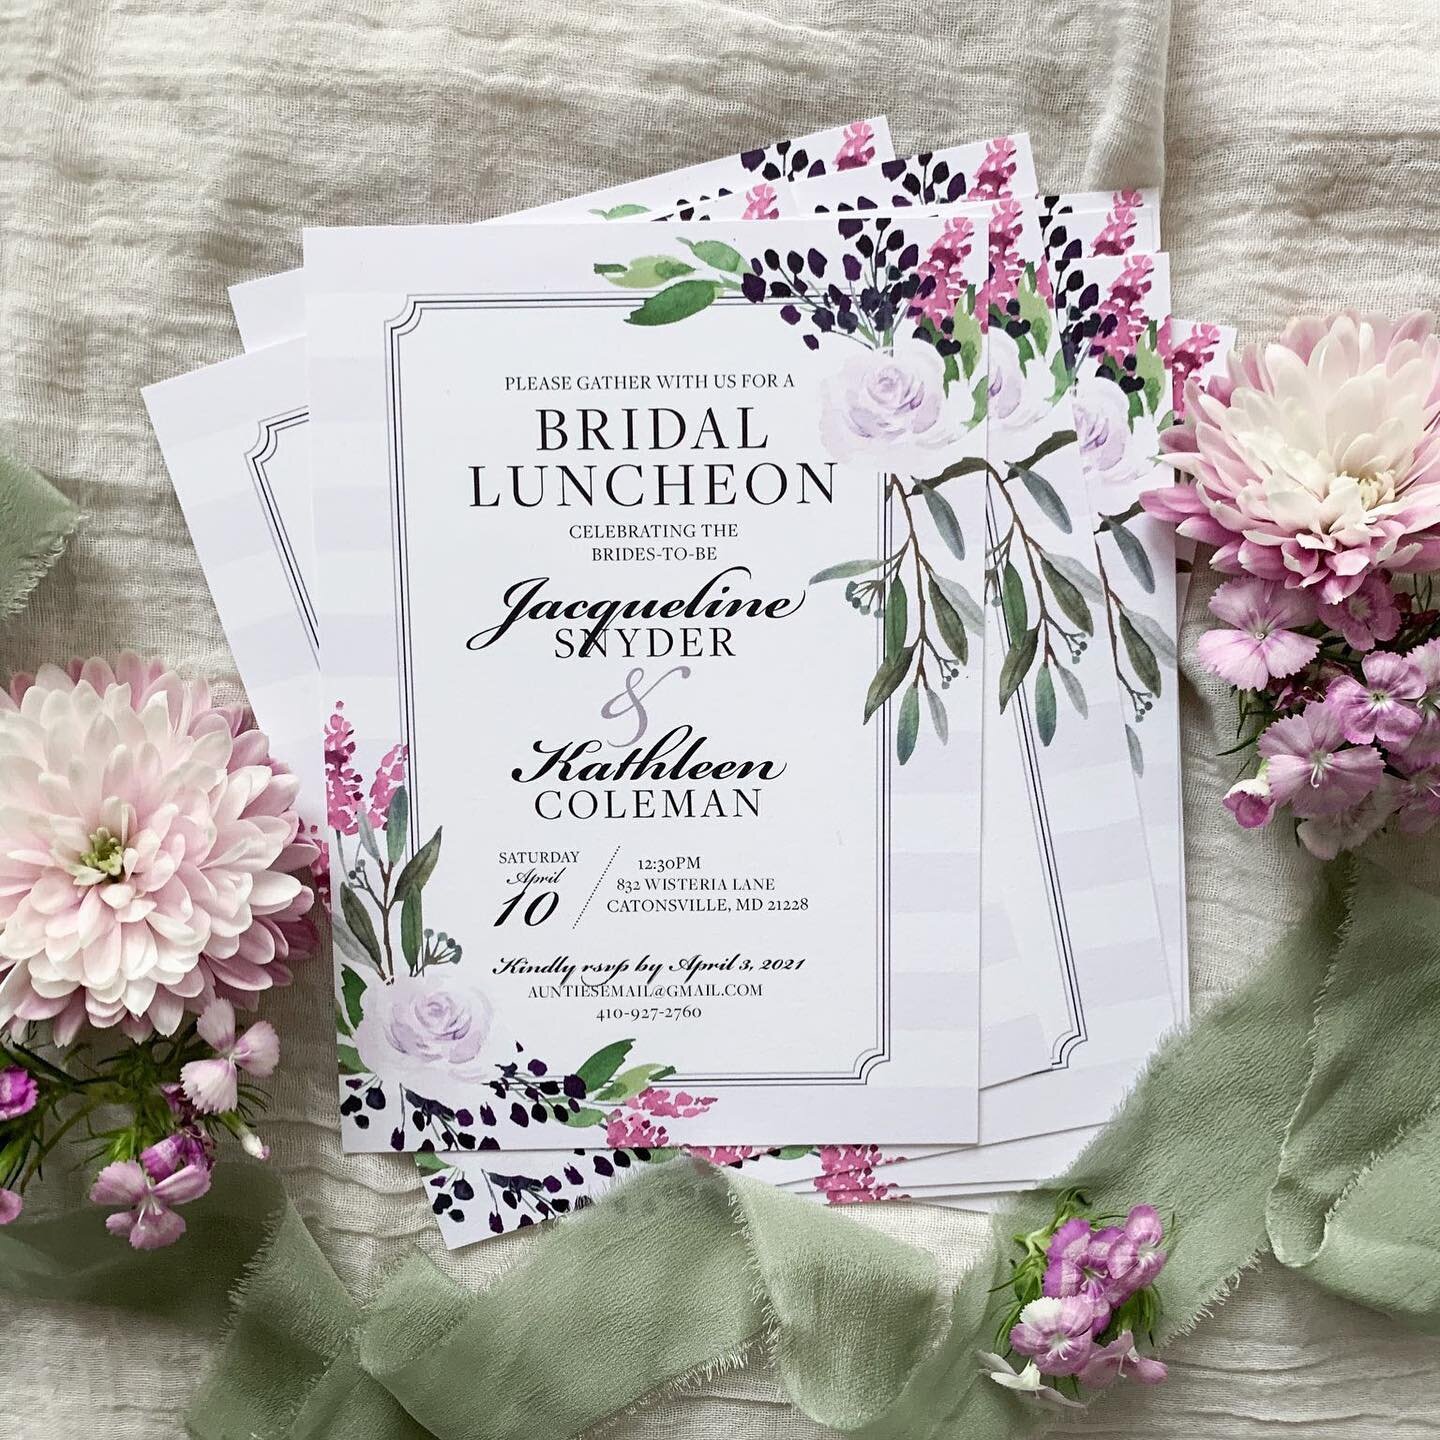 I loved designing this joint bridal shower invite for my cousin and soon-to-be-cousin! 

#invitationdesign #bridalshowerinvitation #stationerylove